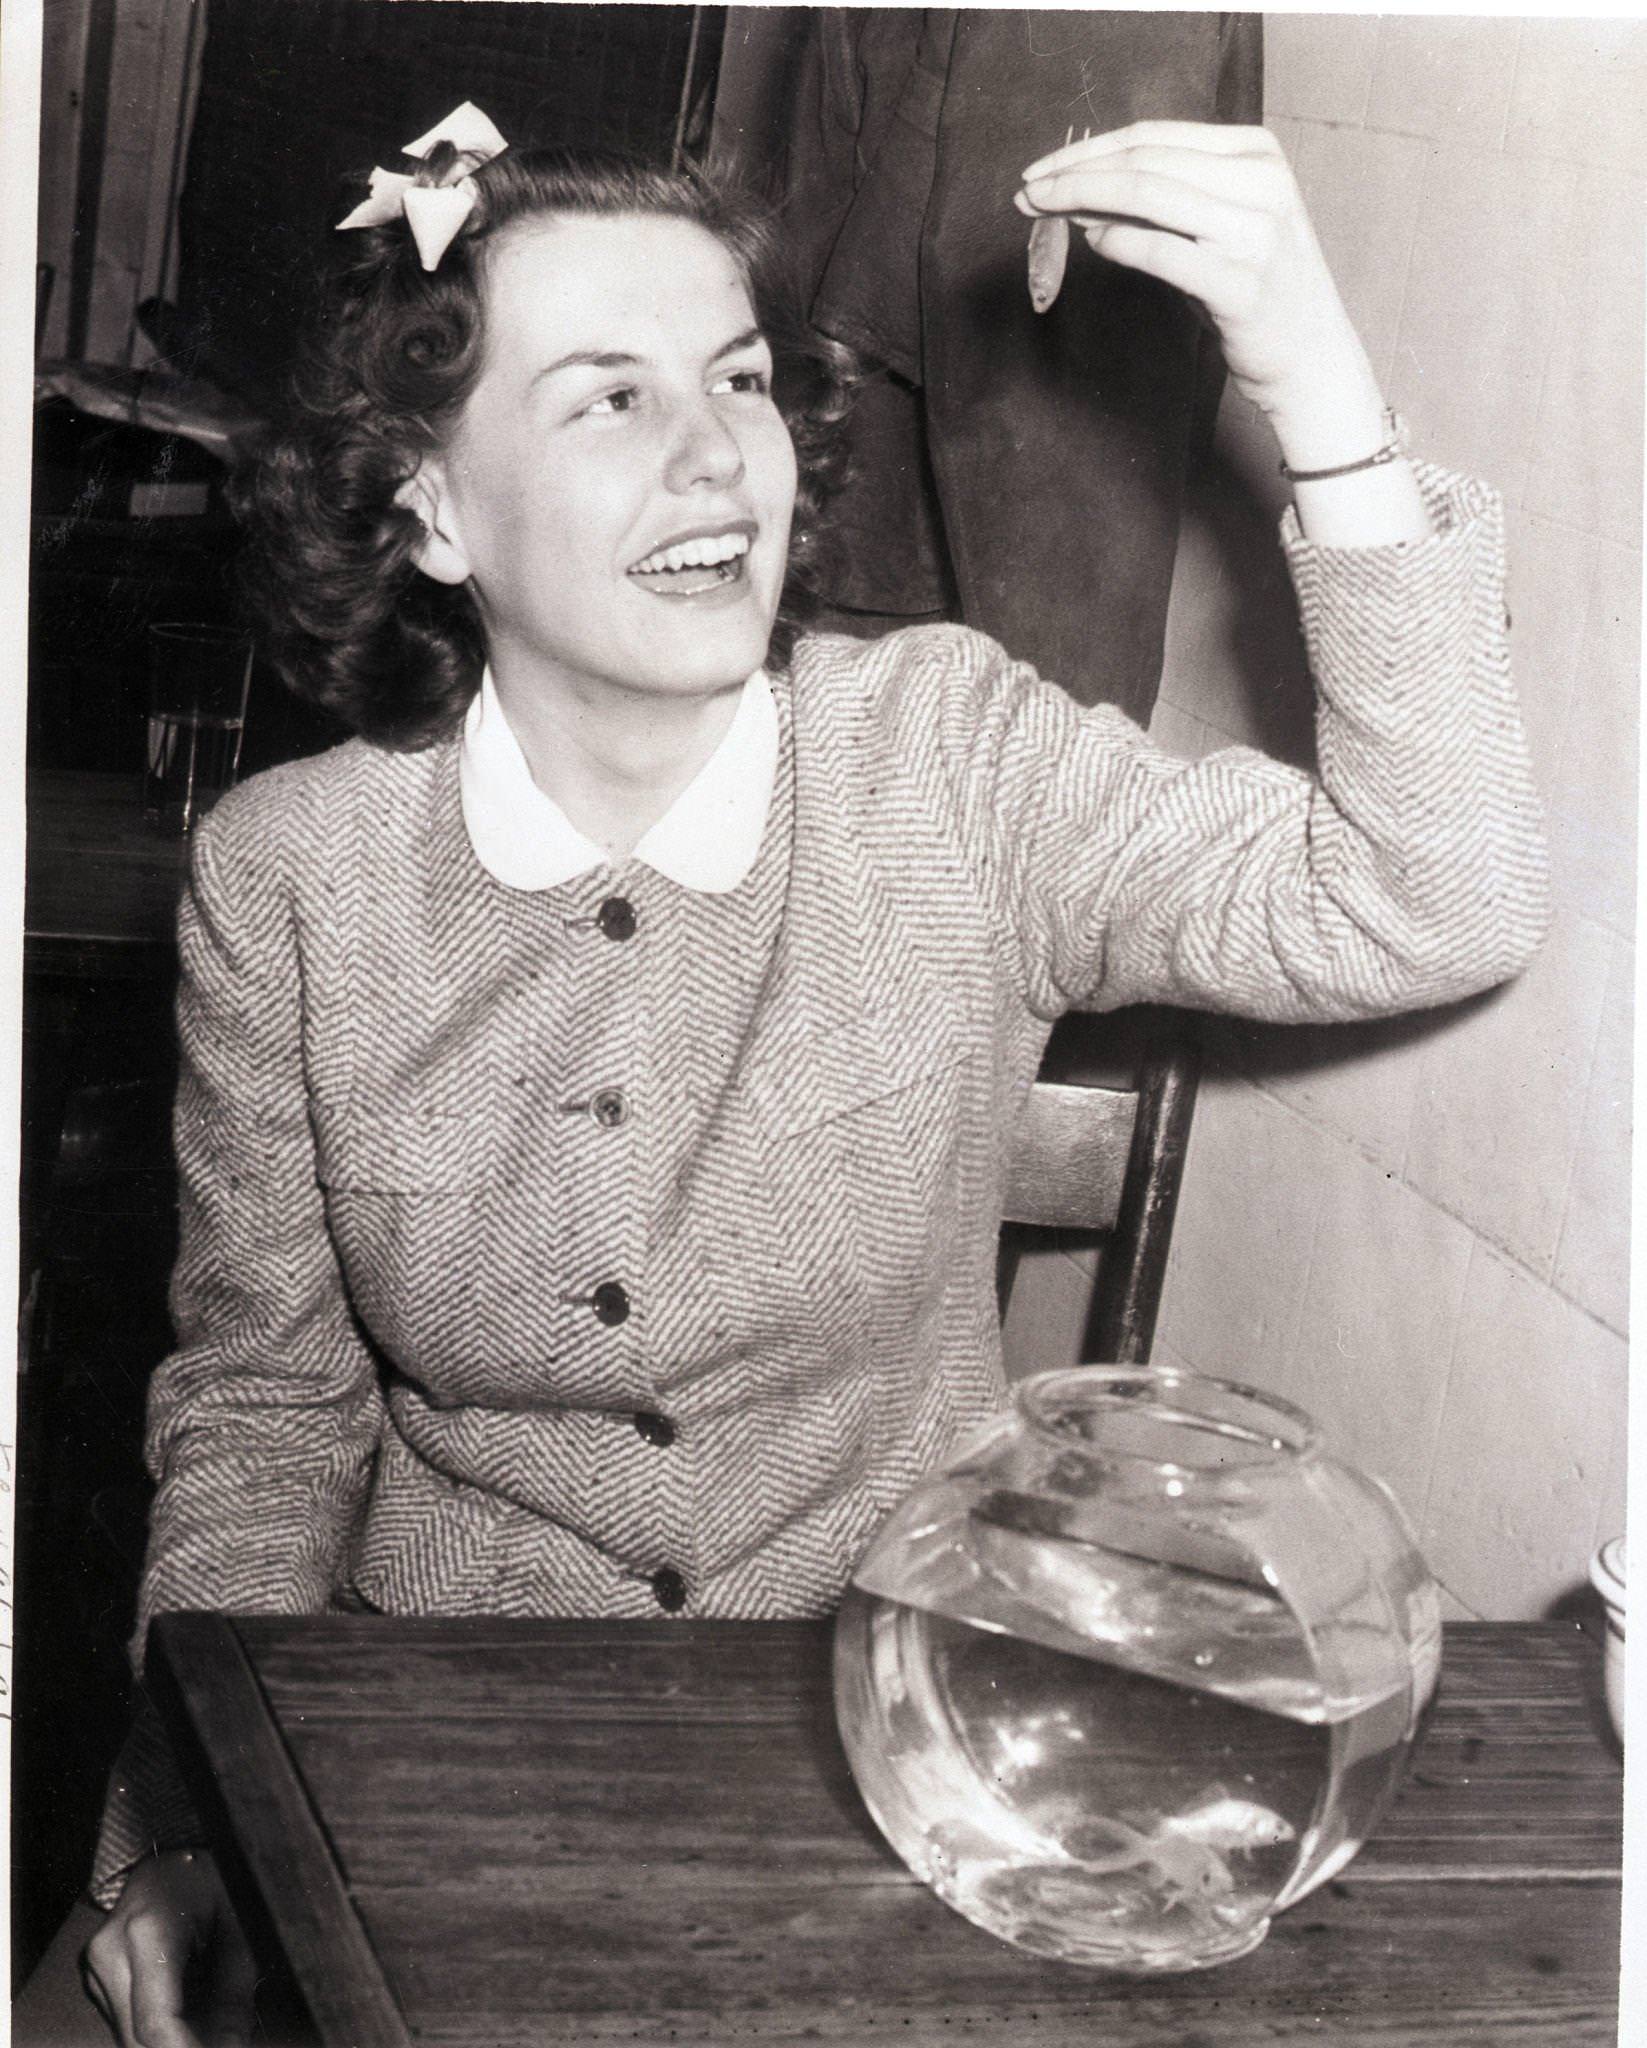 Woman About to Swallow Live Goldfish, 1930s